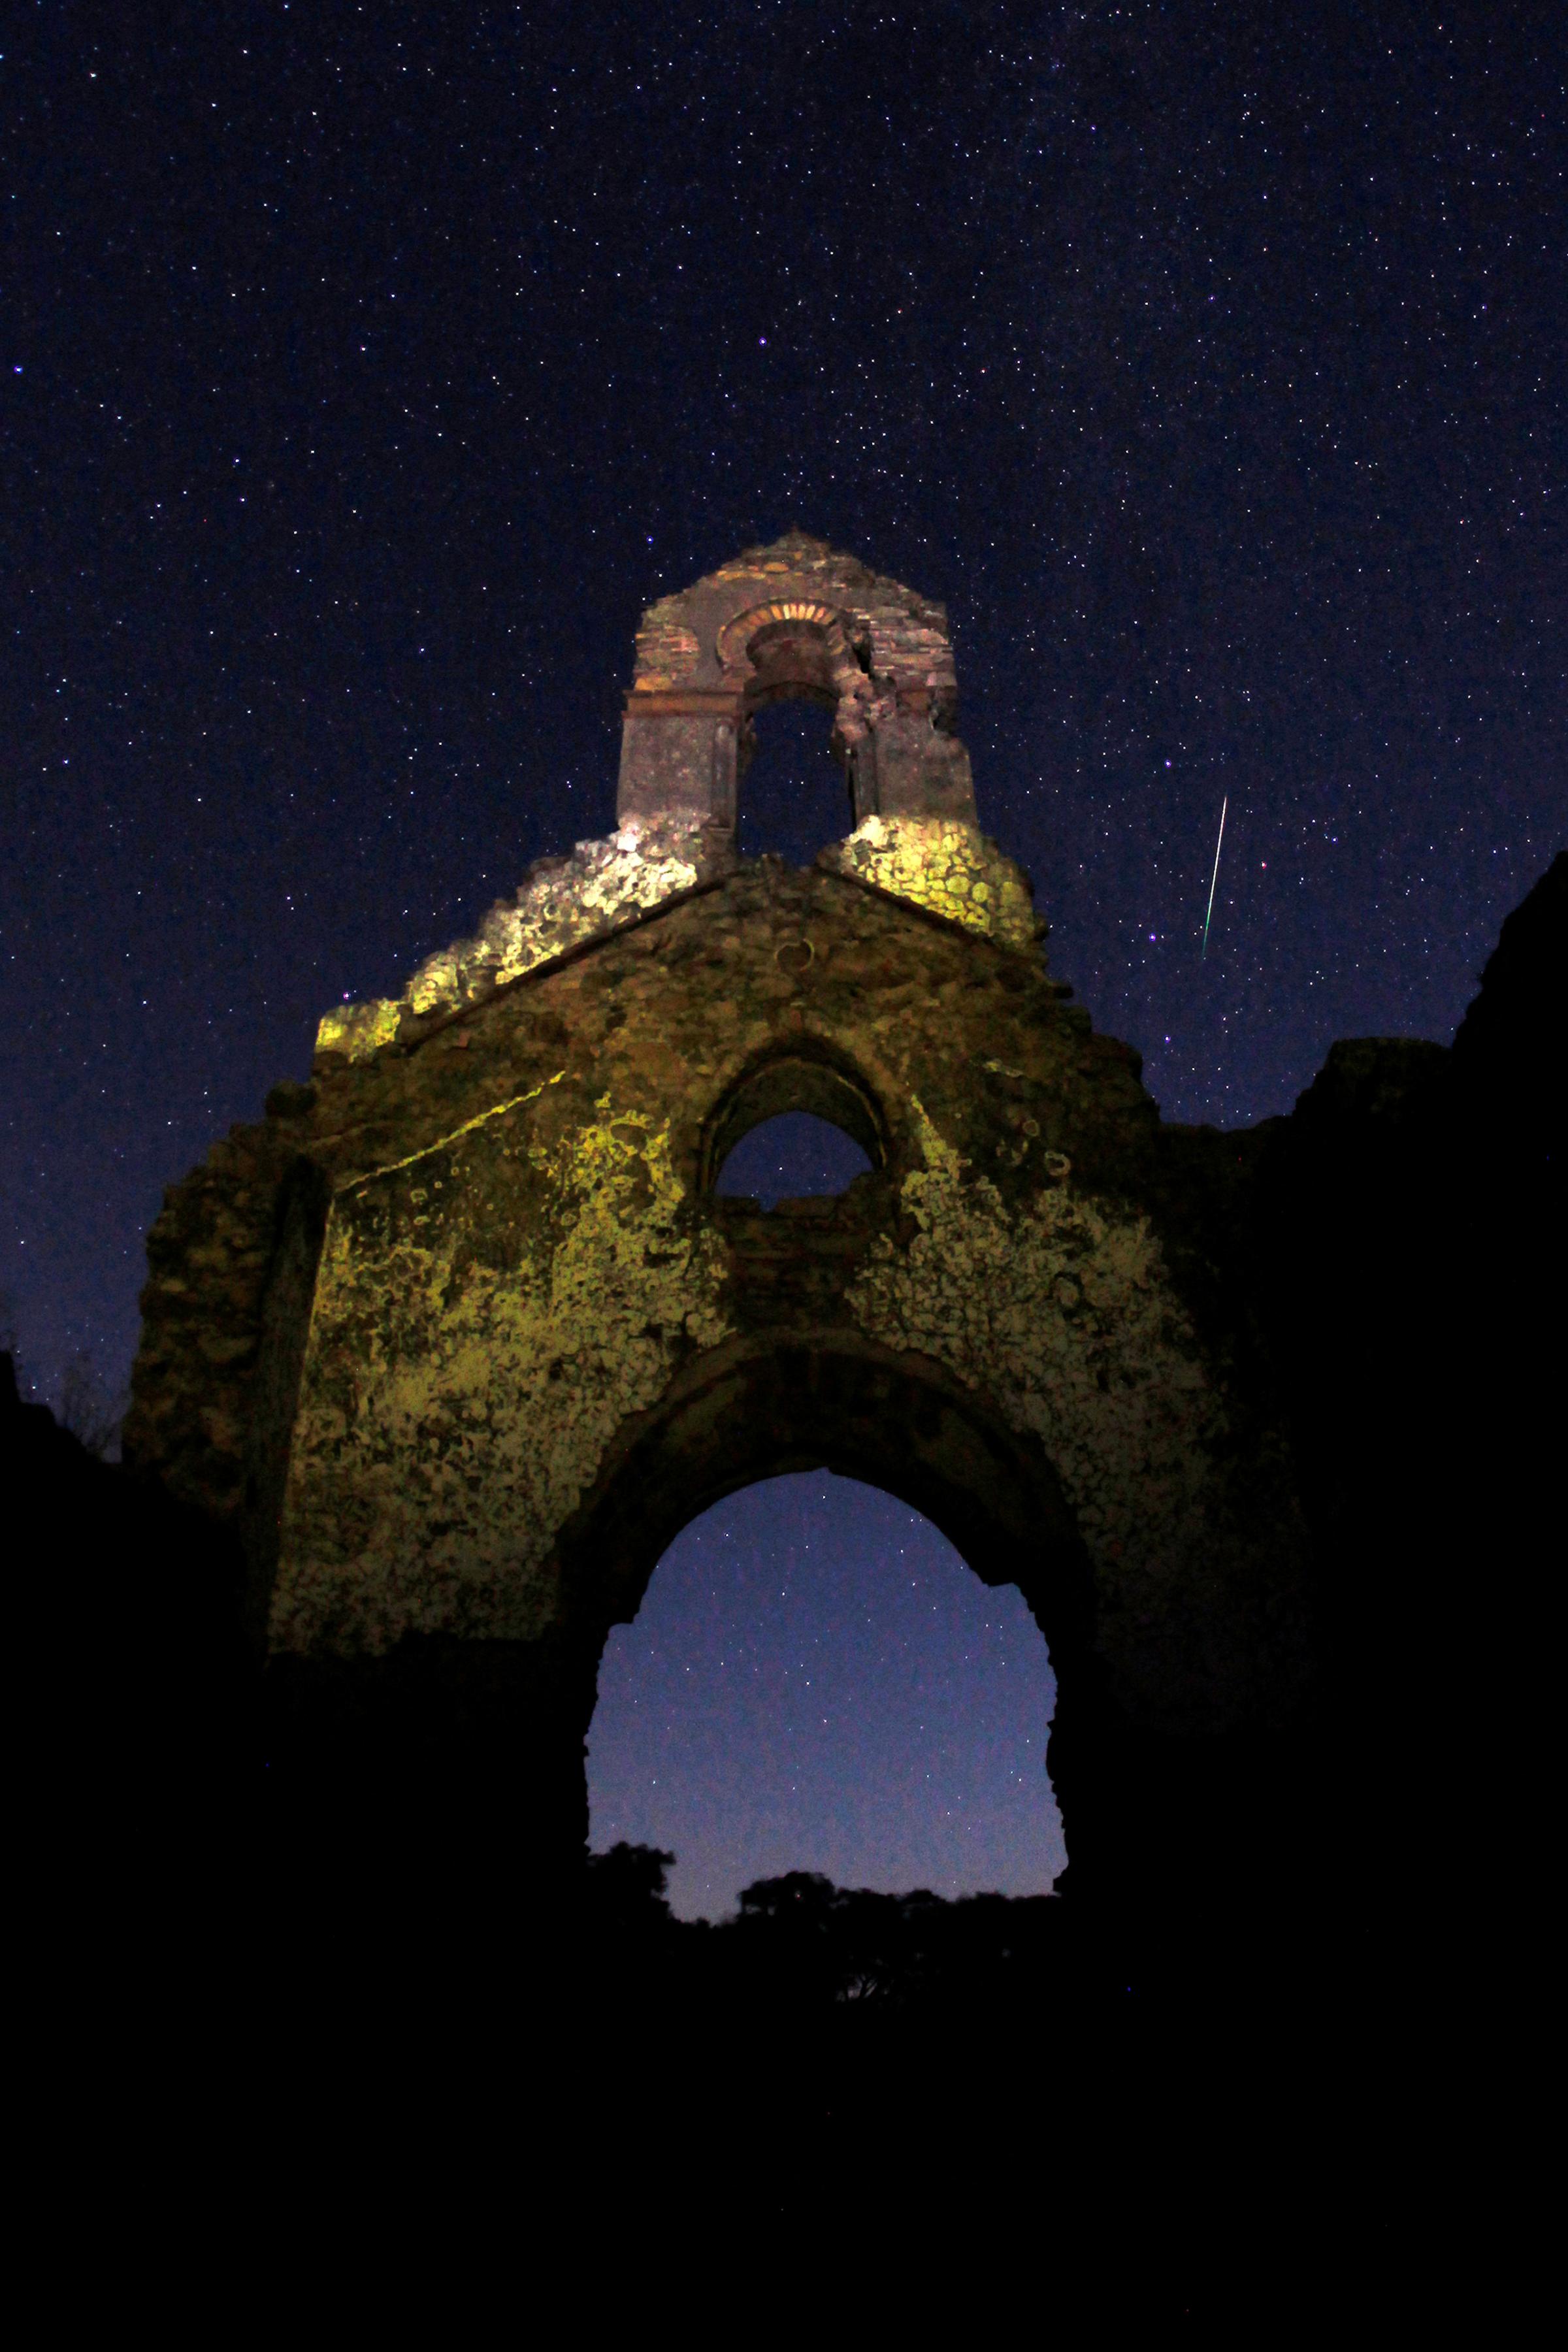 A meteor streaks past stars in the night sky above the ruins of a church in the Los Alcornocales (cork oak forests) nature park, during the Perseid meteor shower in the ancient village of La Sauceda, near Cortes de la Frontera